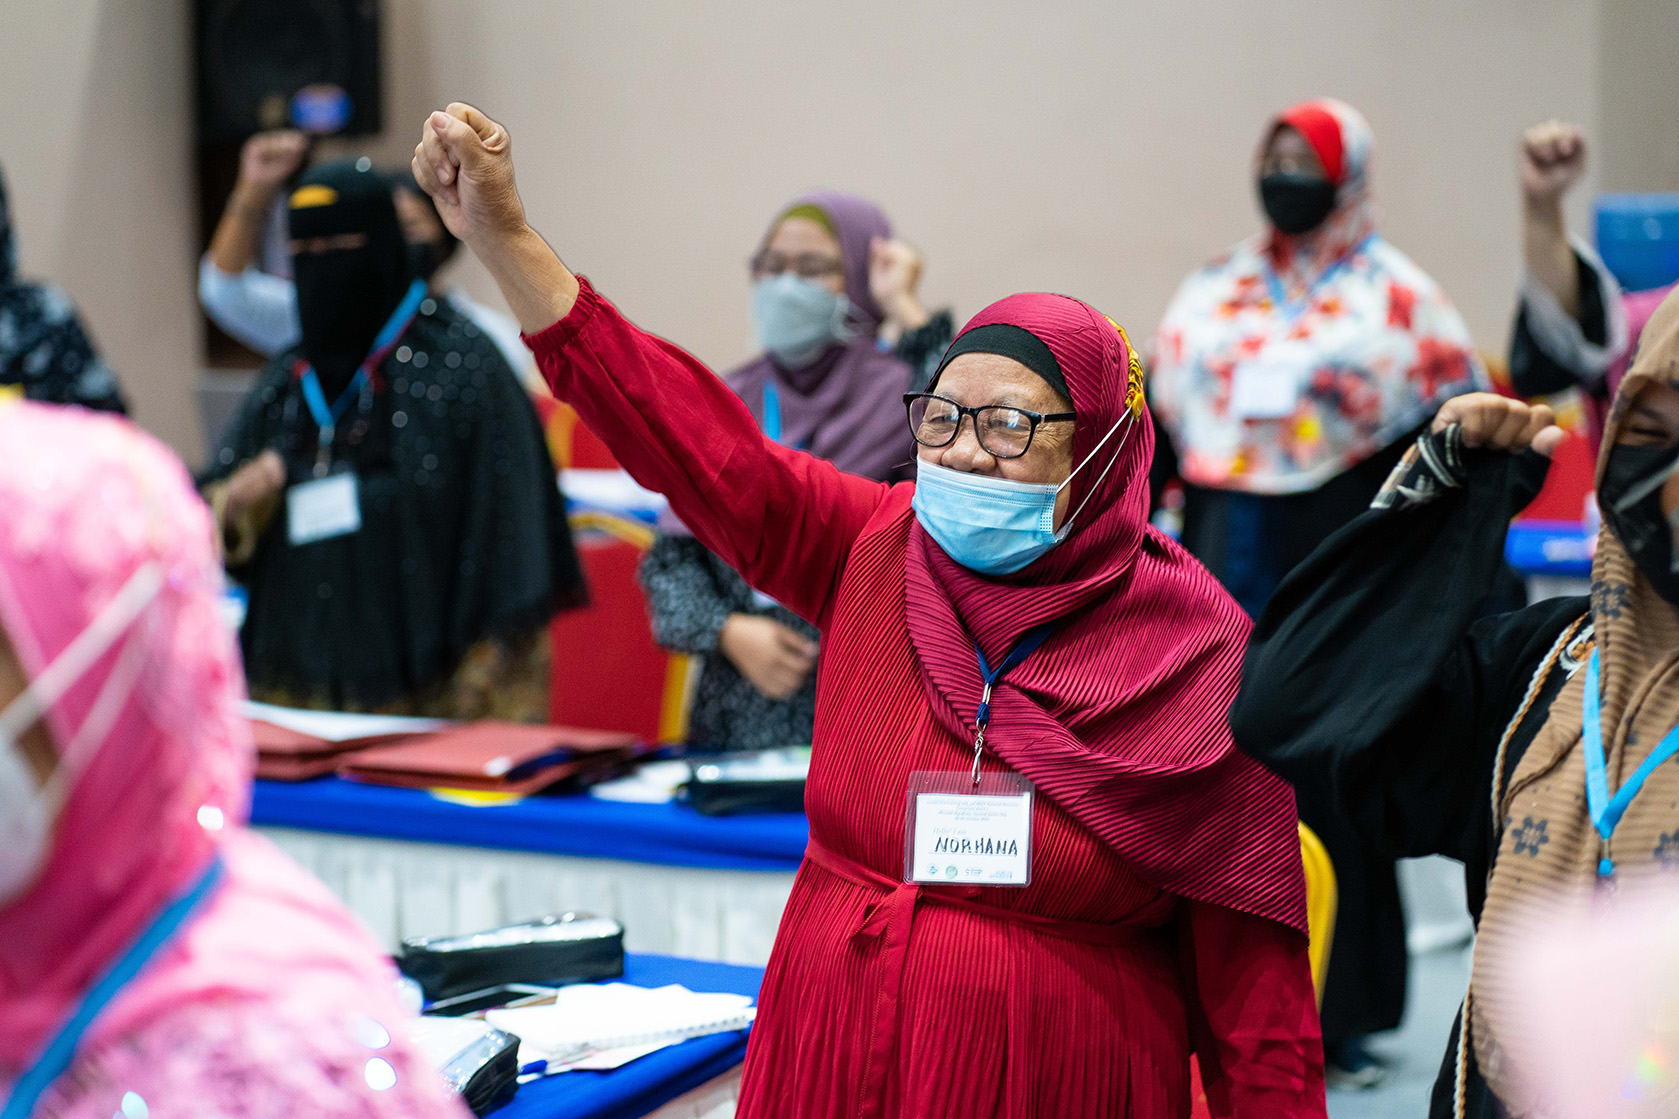 Nurhana Maginalang, a core member of the women’s committee of the former insurgent group MNLF, participates in a UN Women workshop on leadership and gender in General Santos City, the Philippines, on 27 October 2021.